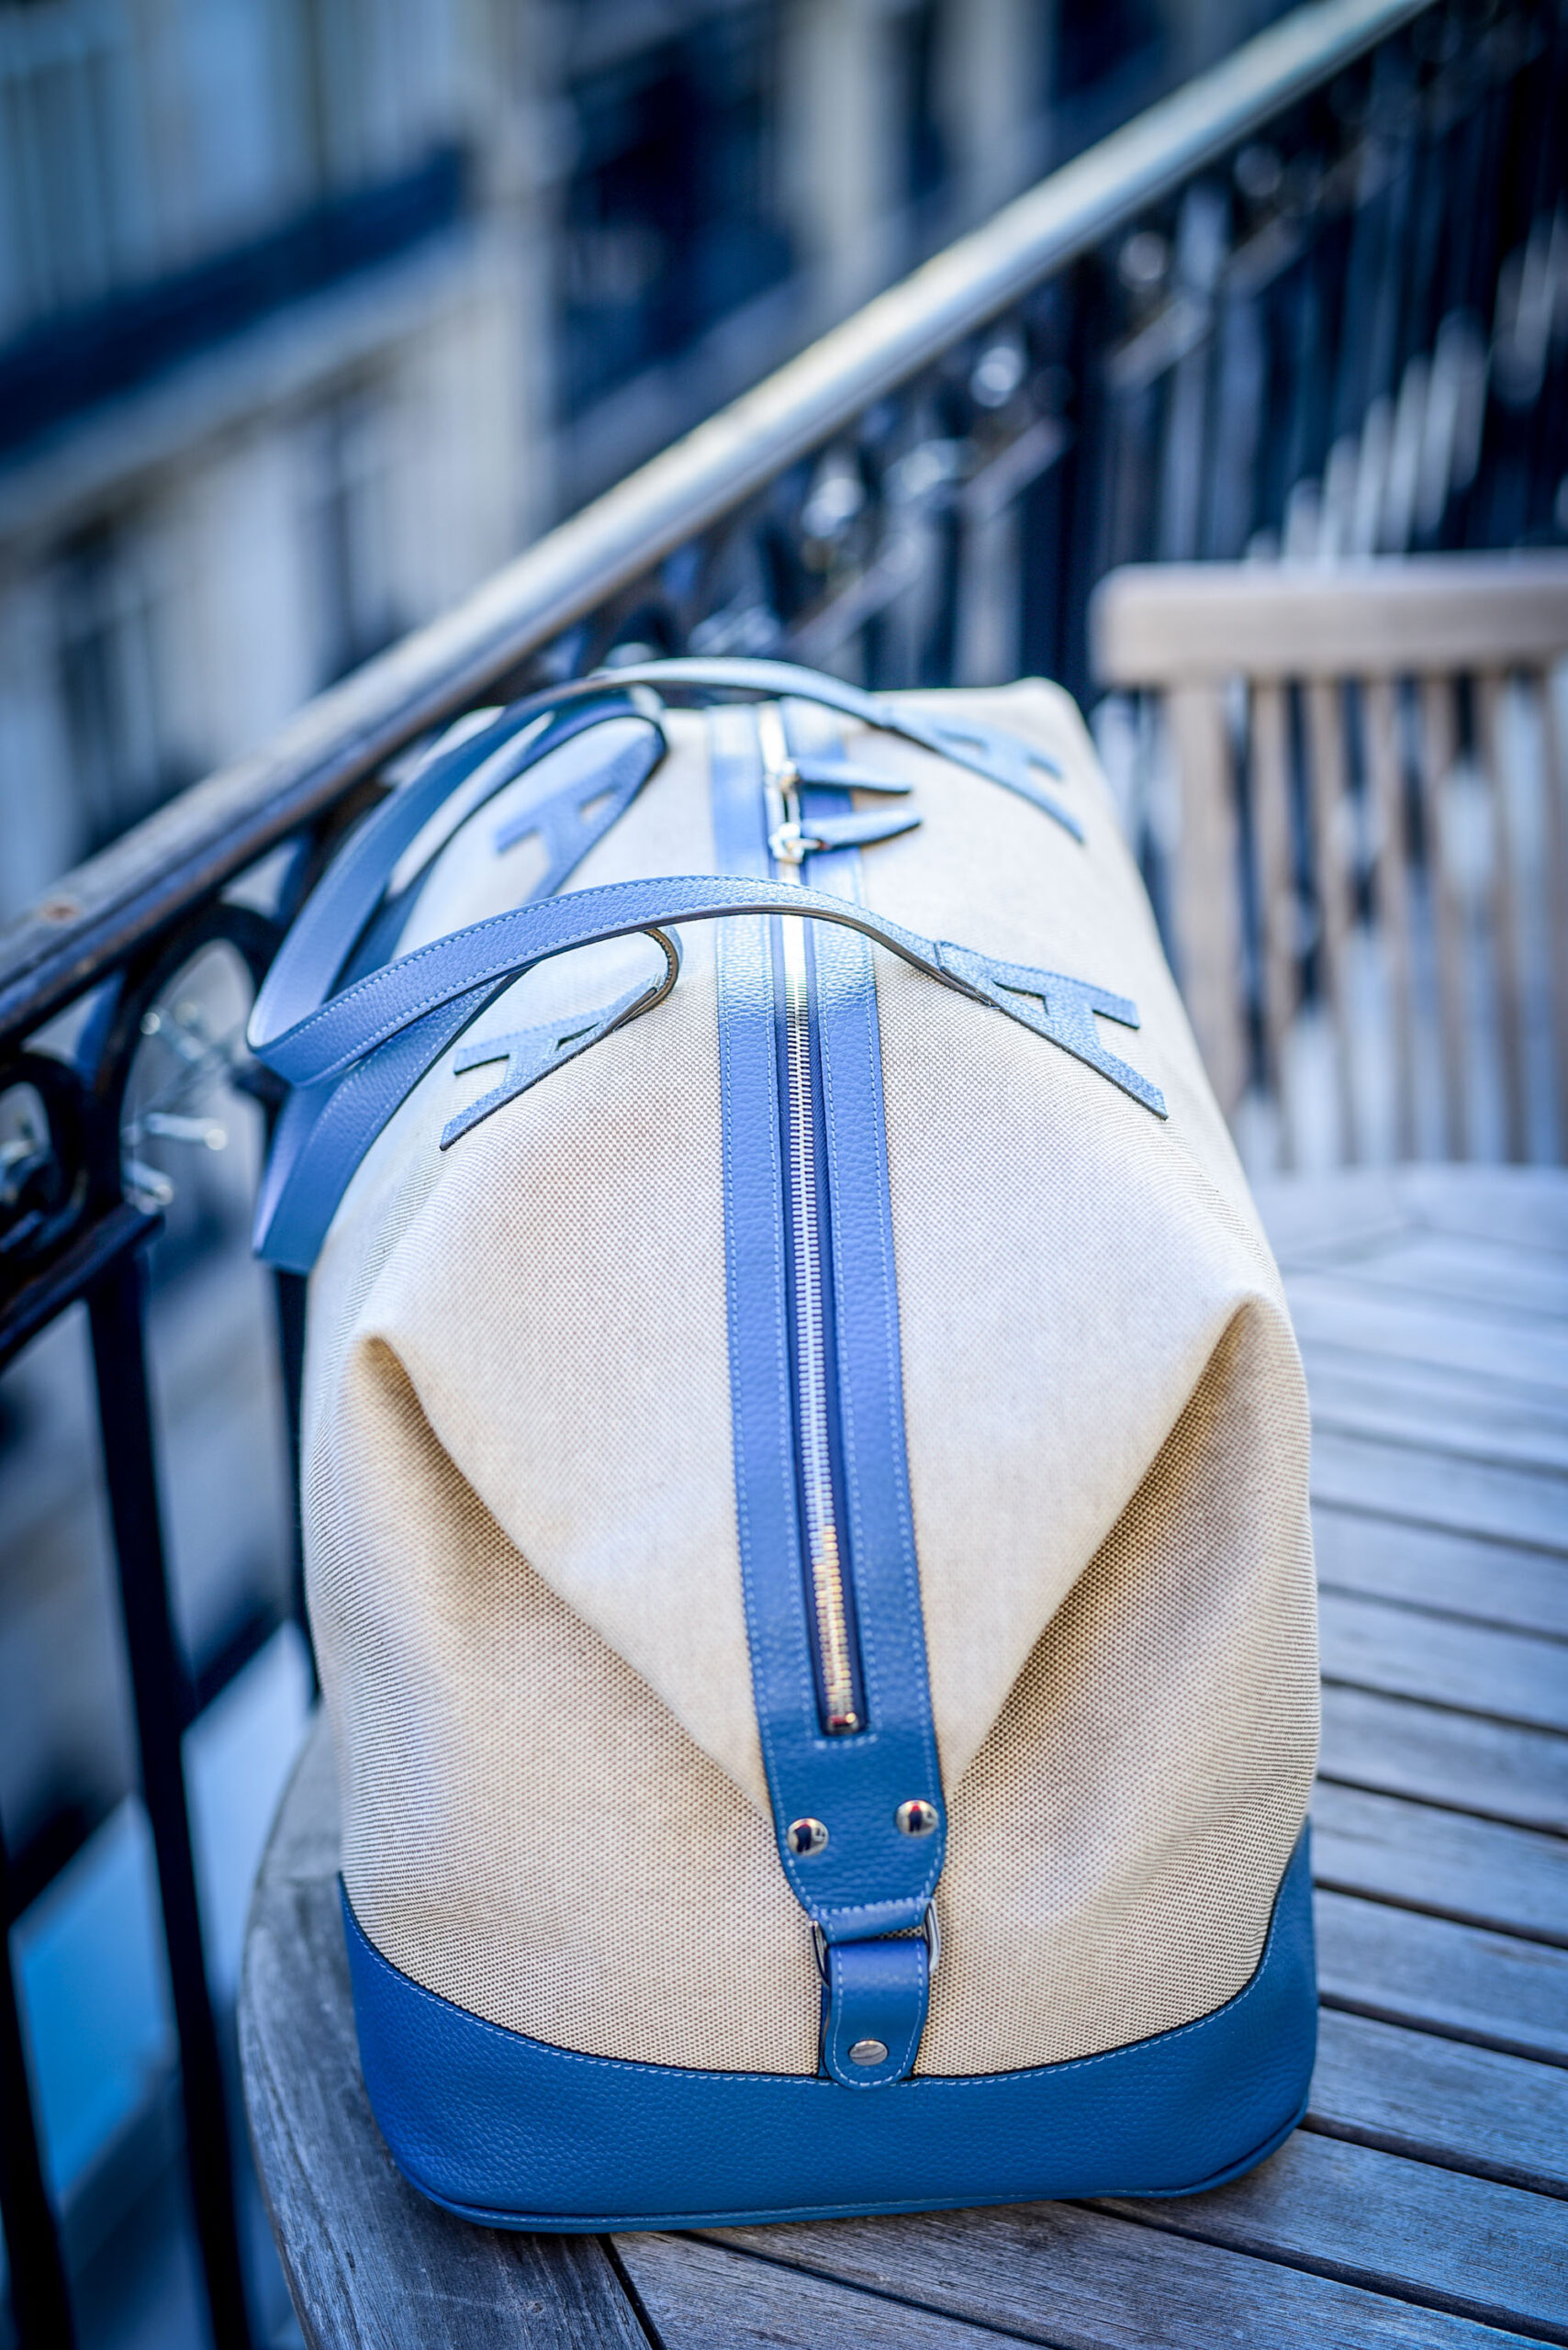 Borromee bag in blue taurillon - The canvas and leather travel